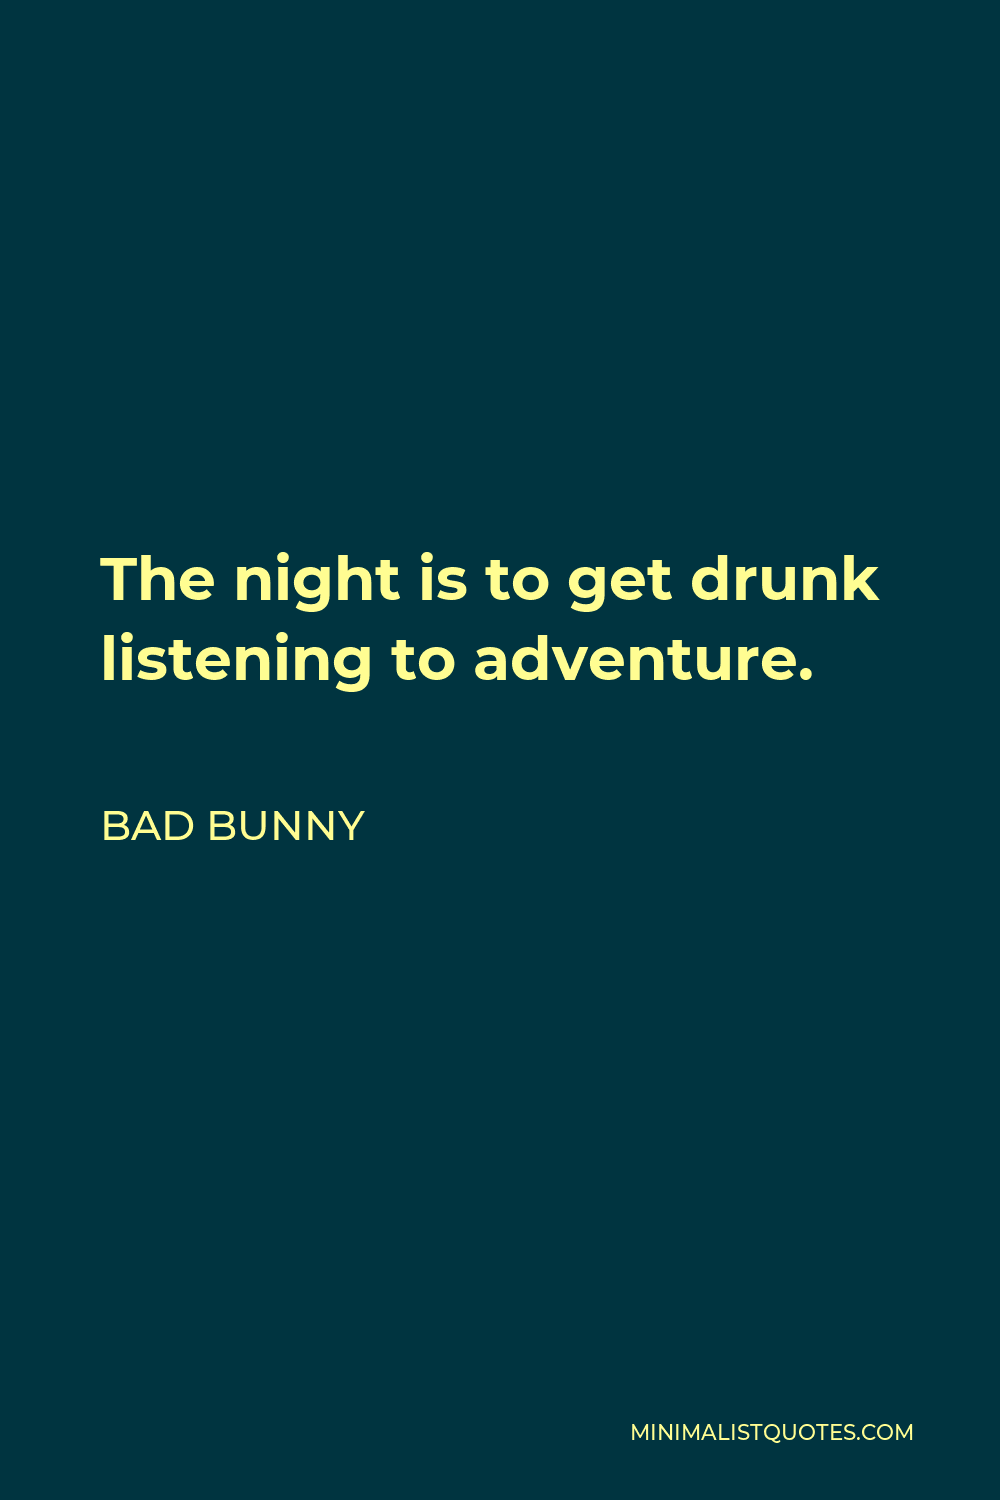 Bad Bunny Quote - The night is to get drunk listening to adventure.